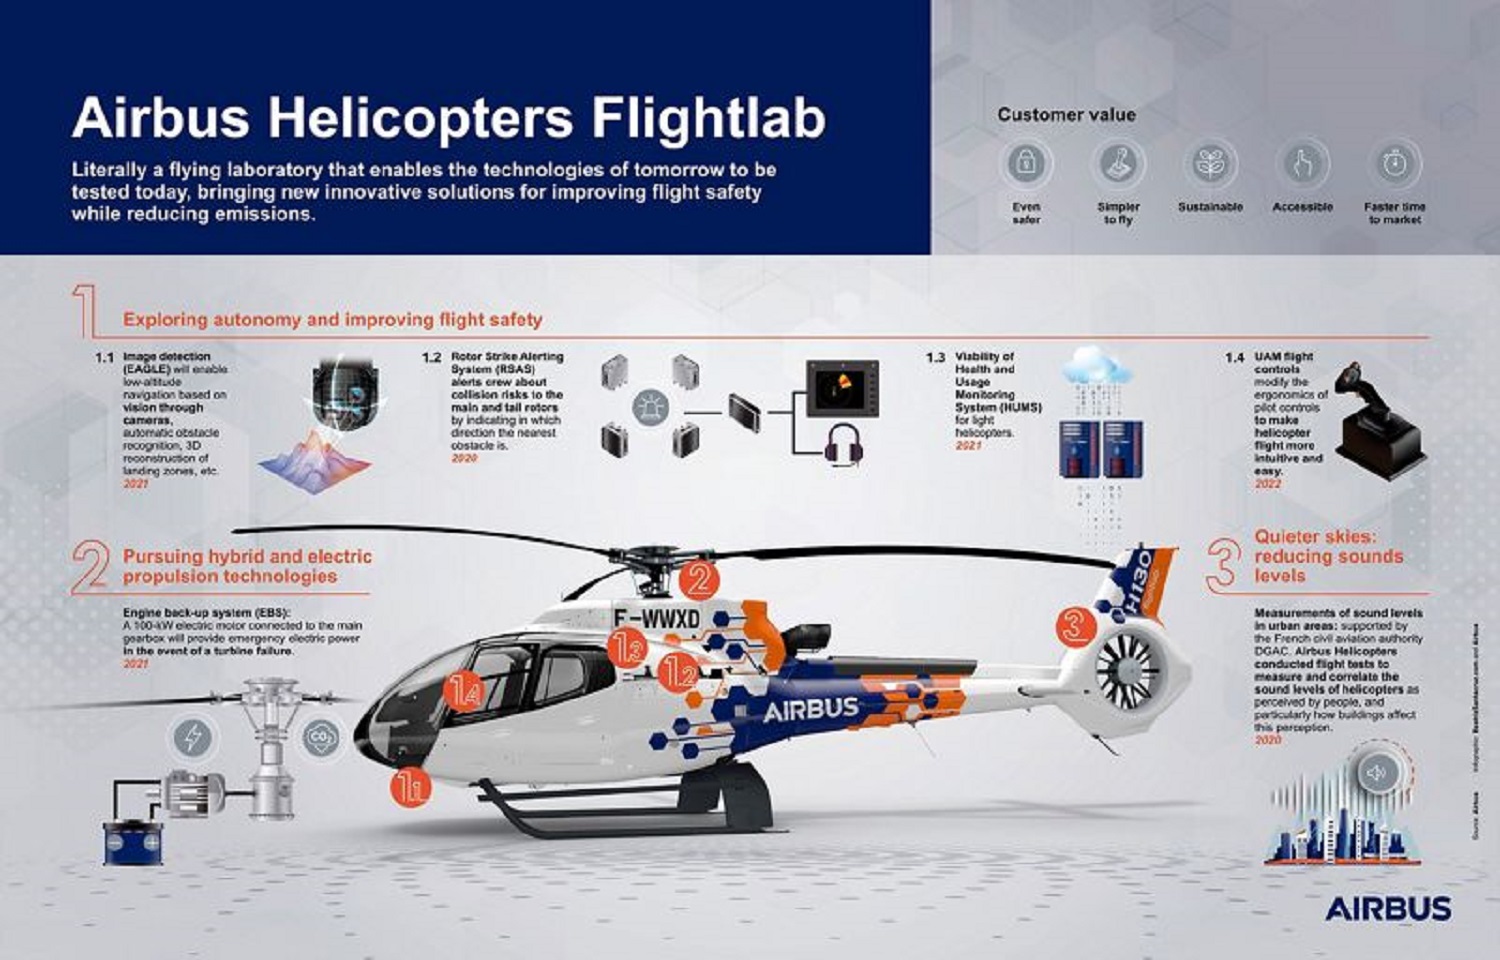 The Airbus Helicopters Flightlab is a flying laboratory exclusively dedicated to maturing new technologies.